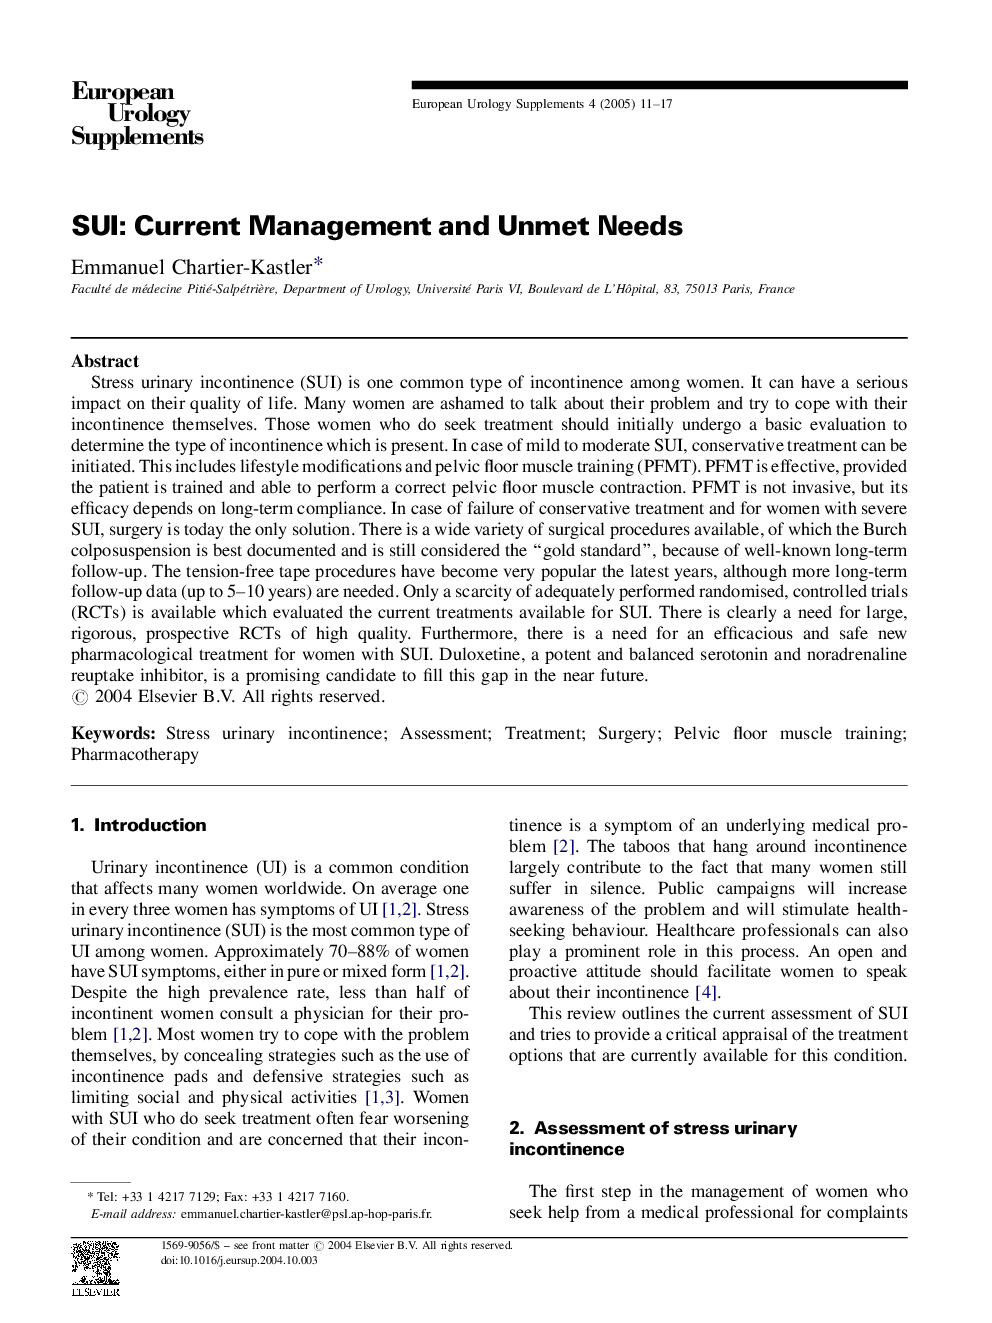 SUI: Current Management and Unmet Needs